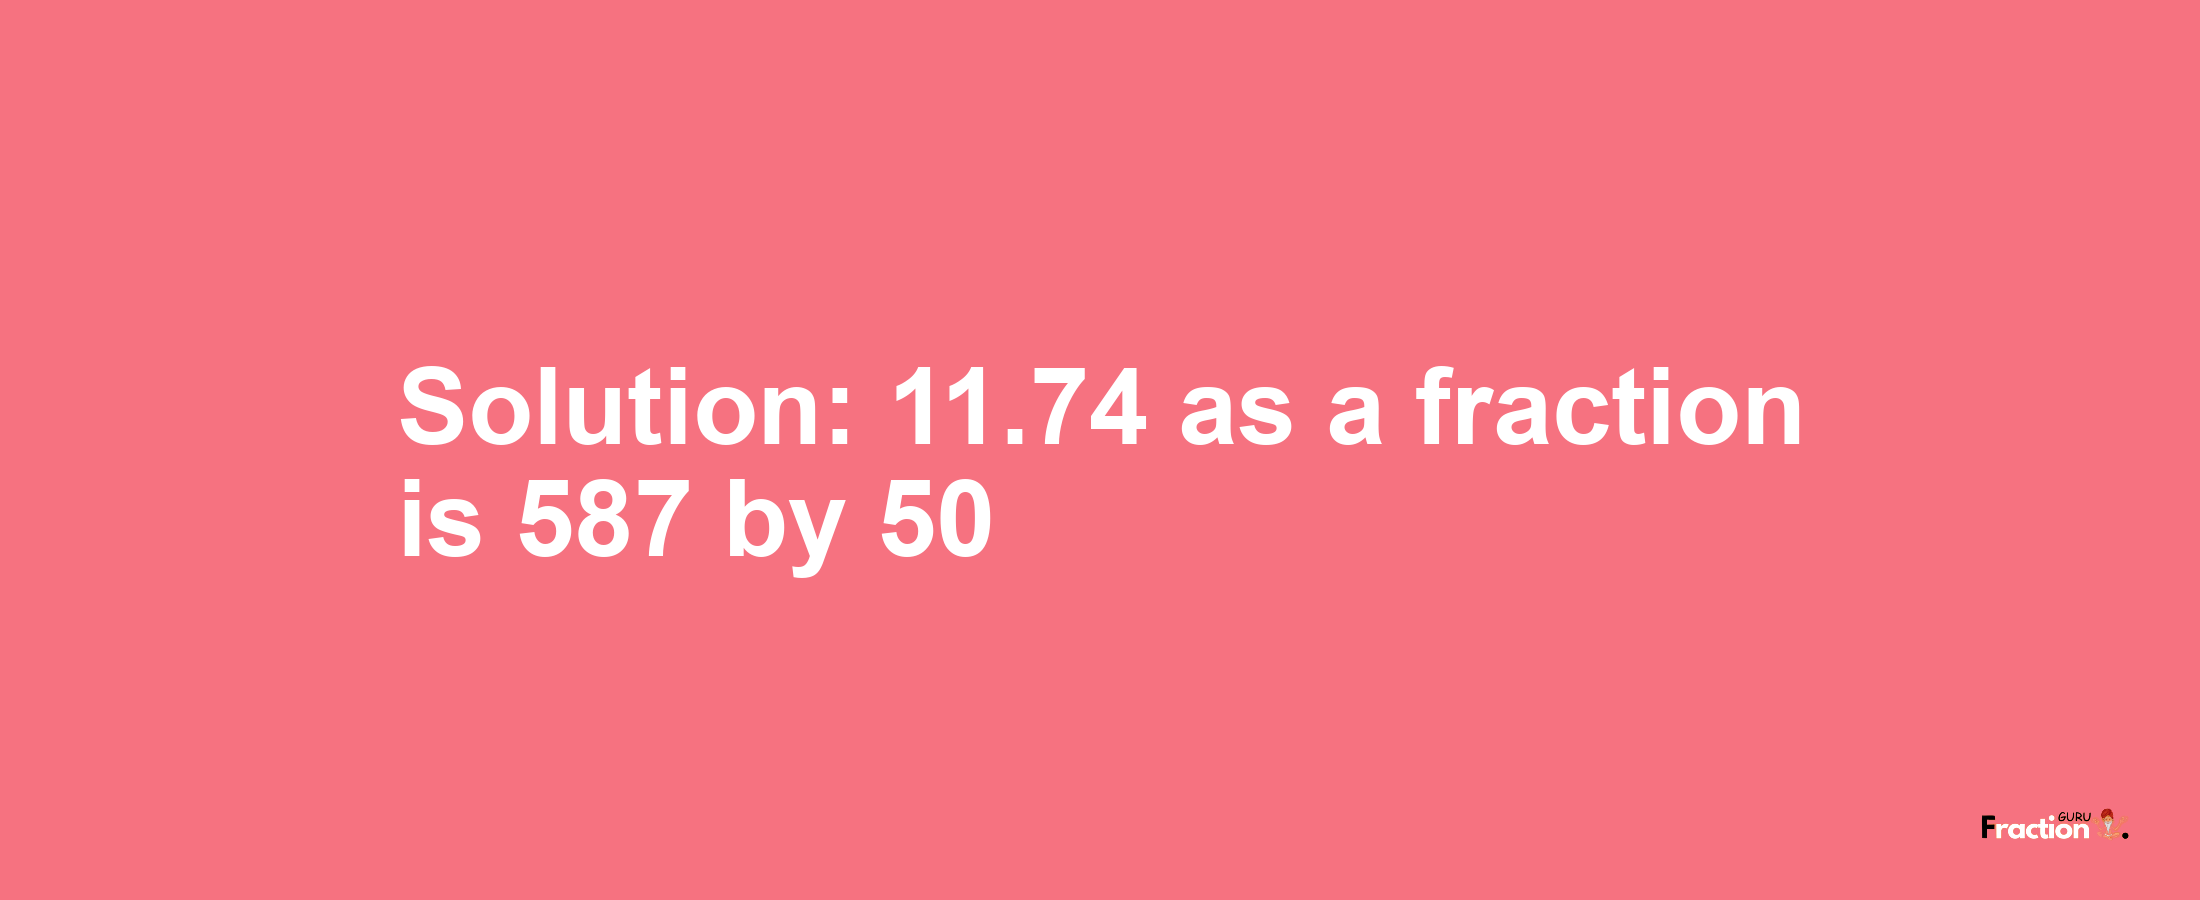 Solution:11.74 as a fraction is 587/50